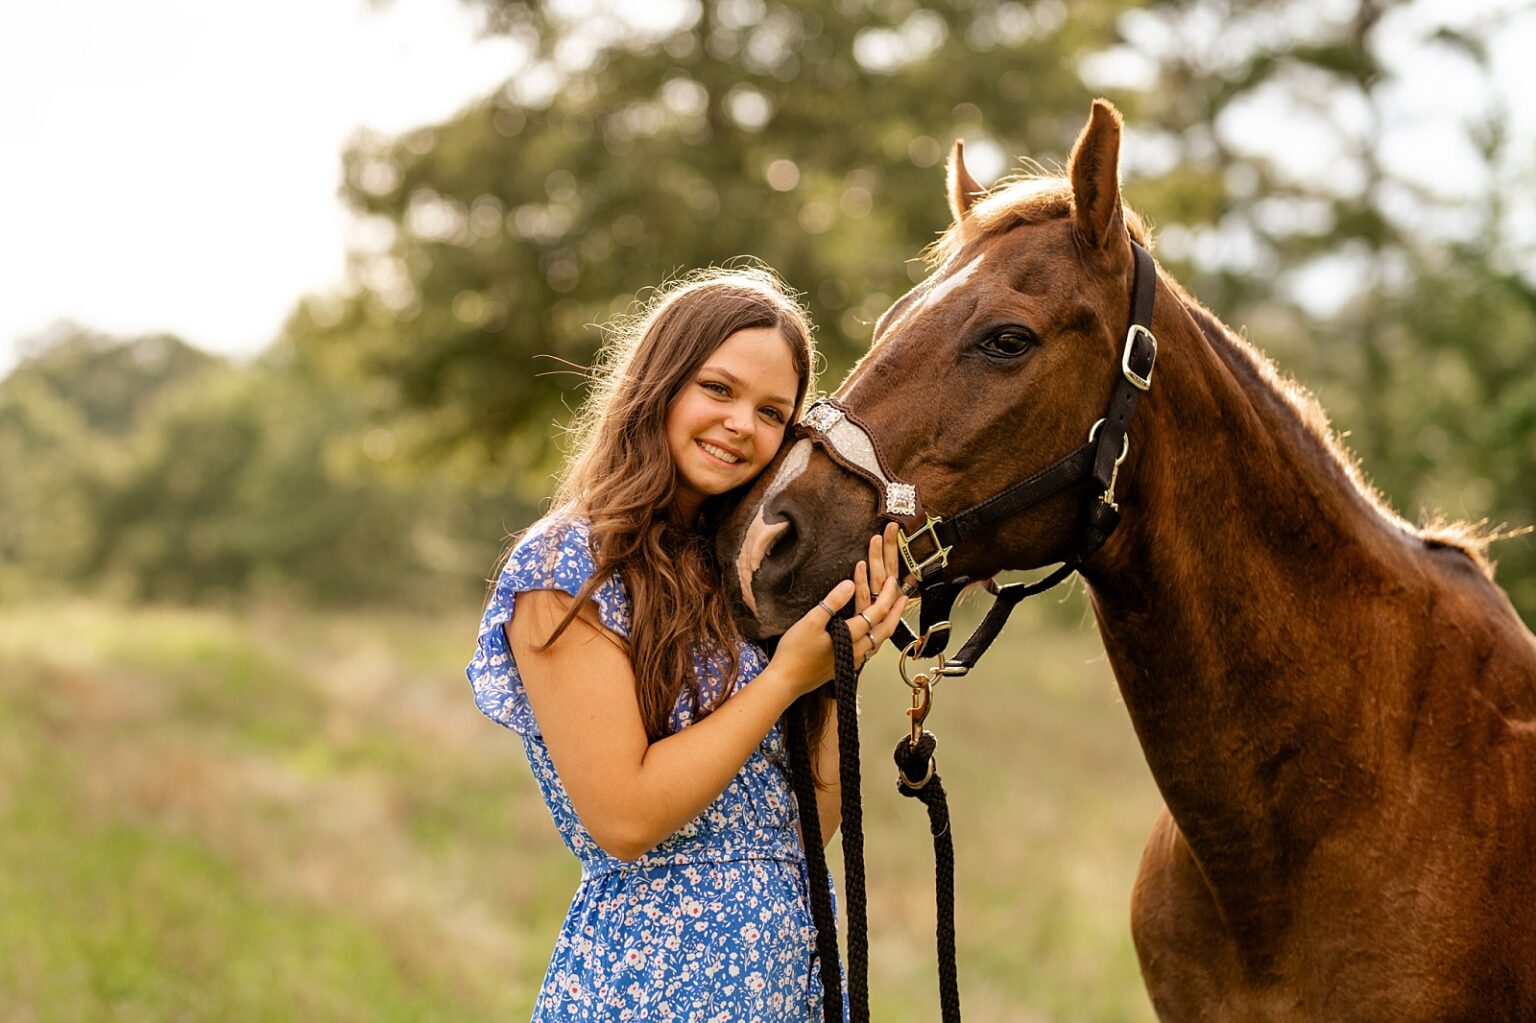 Western horse photographer in Alabama takes photos of barrel racer with her heart horse in floral blue dress.